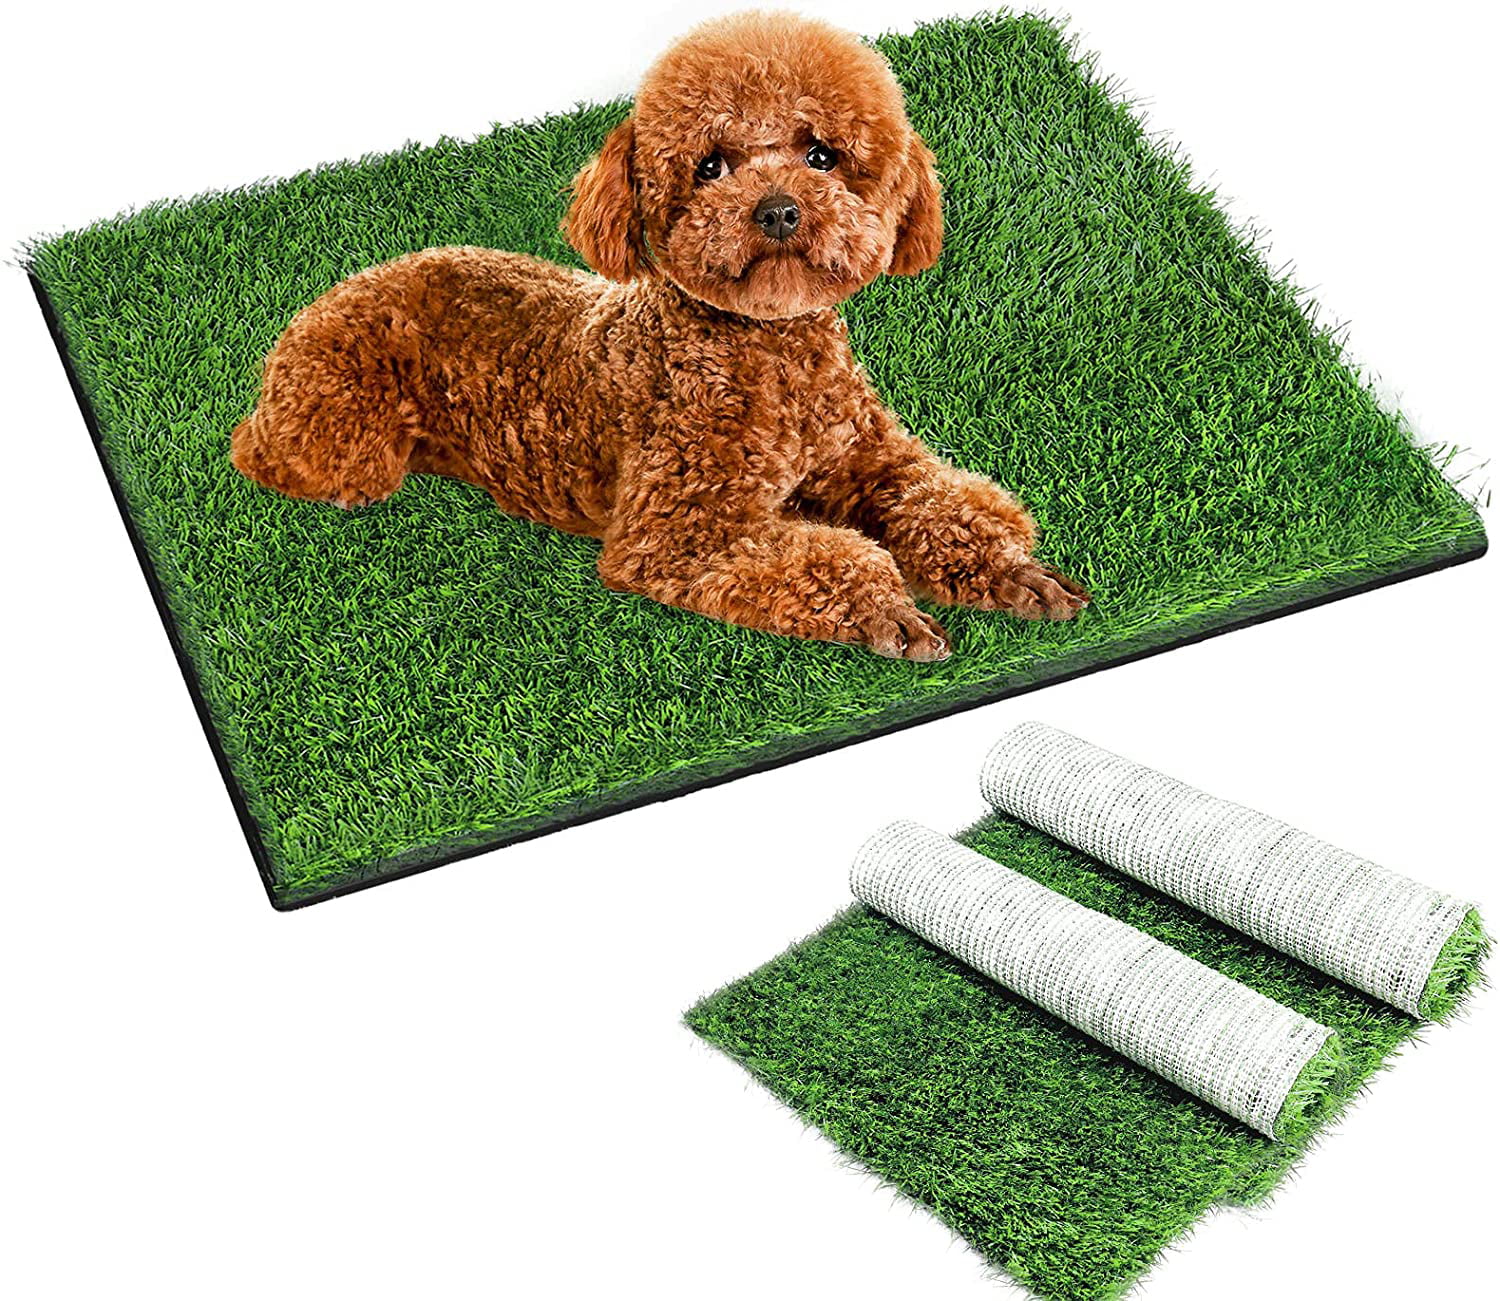 Artificial Grass Pad for Dogs Puppy Lawn Pee Mat No Shedding Dog Pee Grass Turf,Ideal for Pet Potty Pad,Grass Doormat Dog Potty Grass with Leak Holes Fake Grass for Dogs to Pee On 40x50 